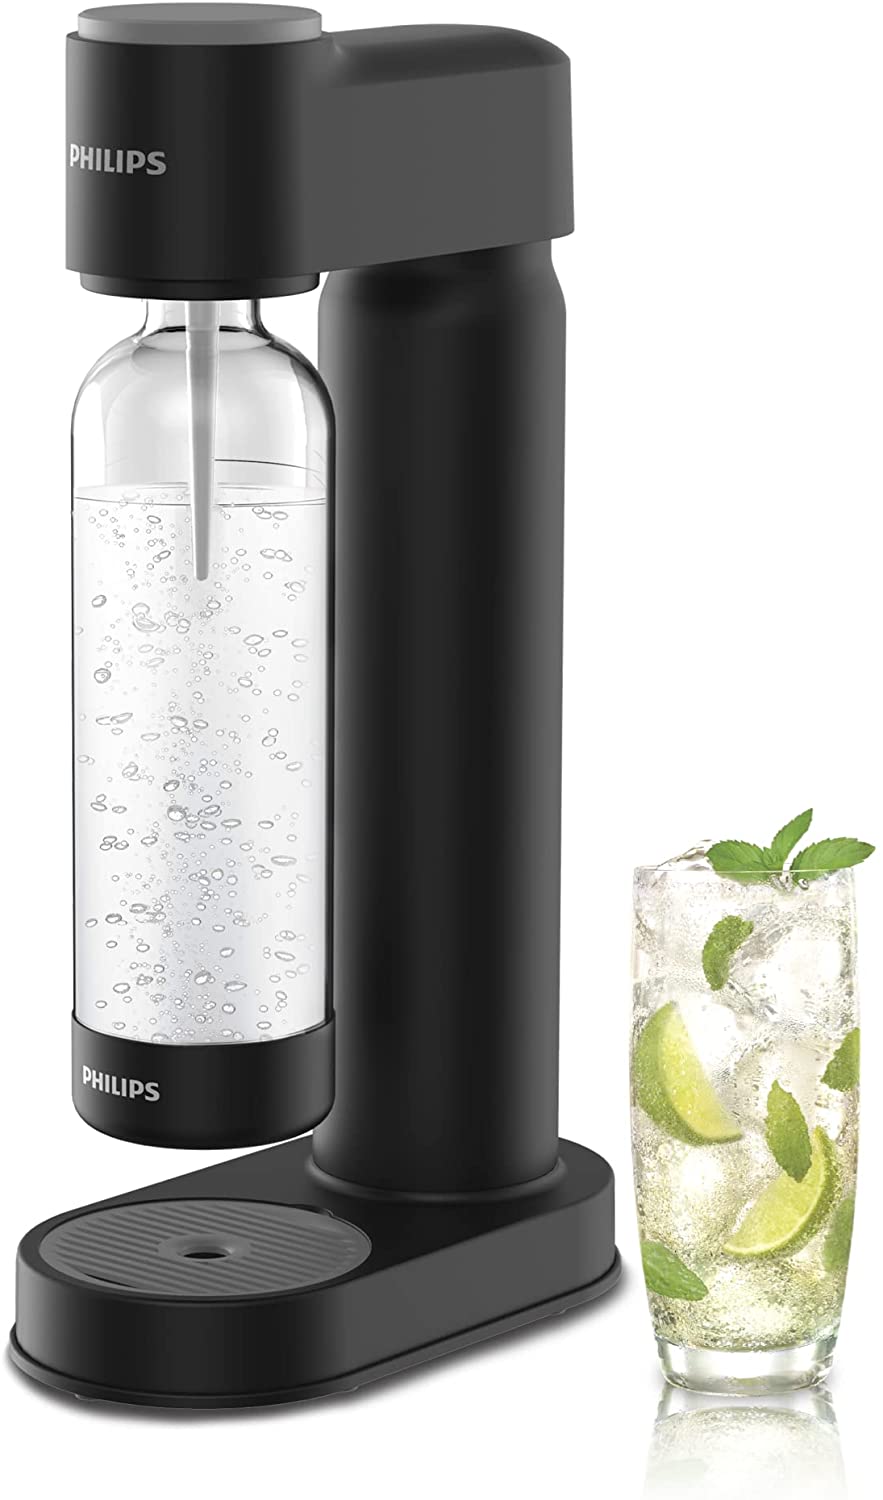 Philips Stainless Sparkling Water Maker Soda Maker Machine for Home Carbonating with BPA free PET 1L Carbonating Bottle